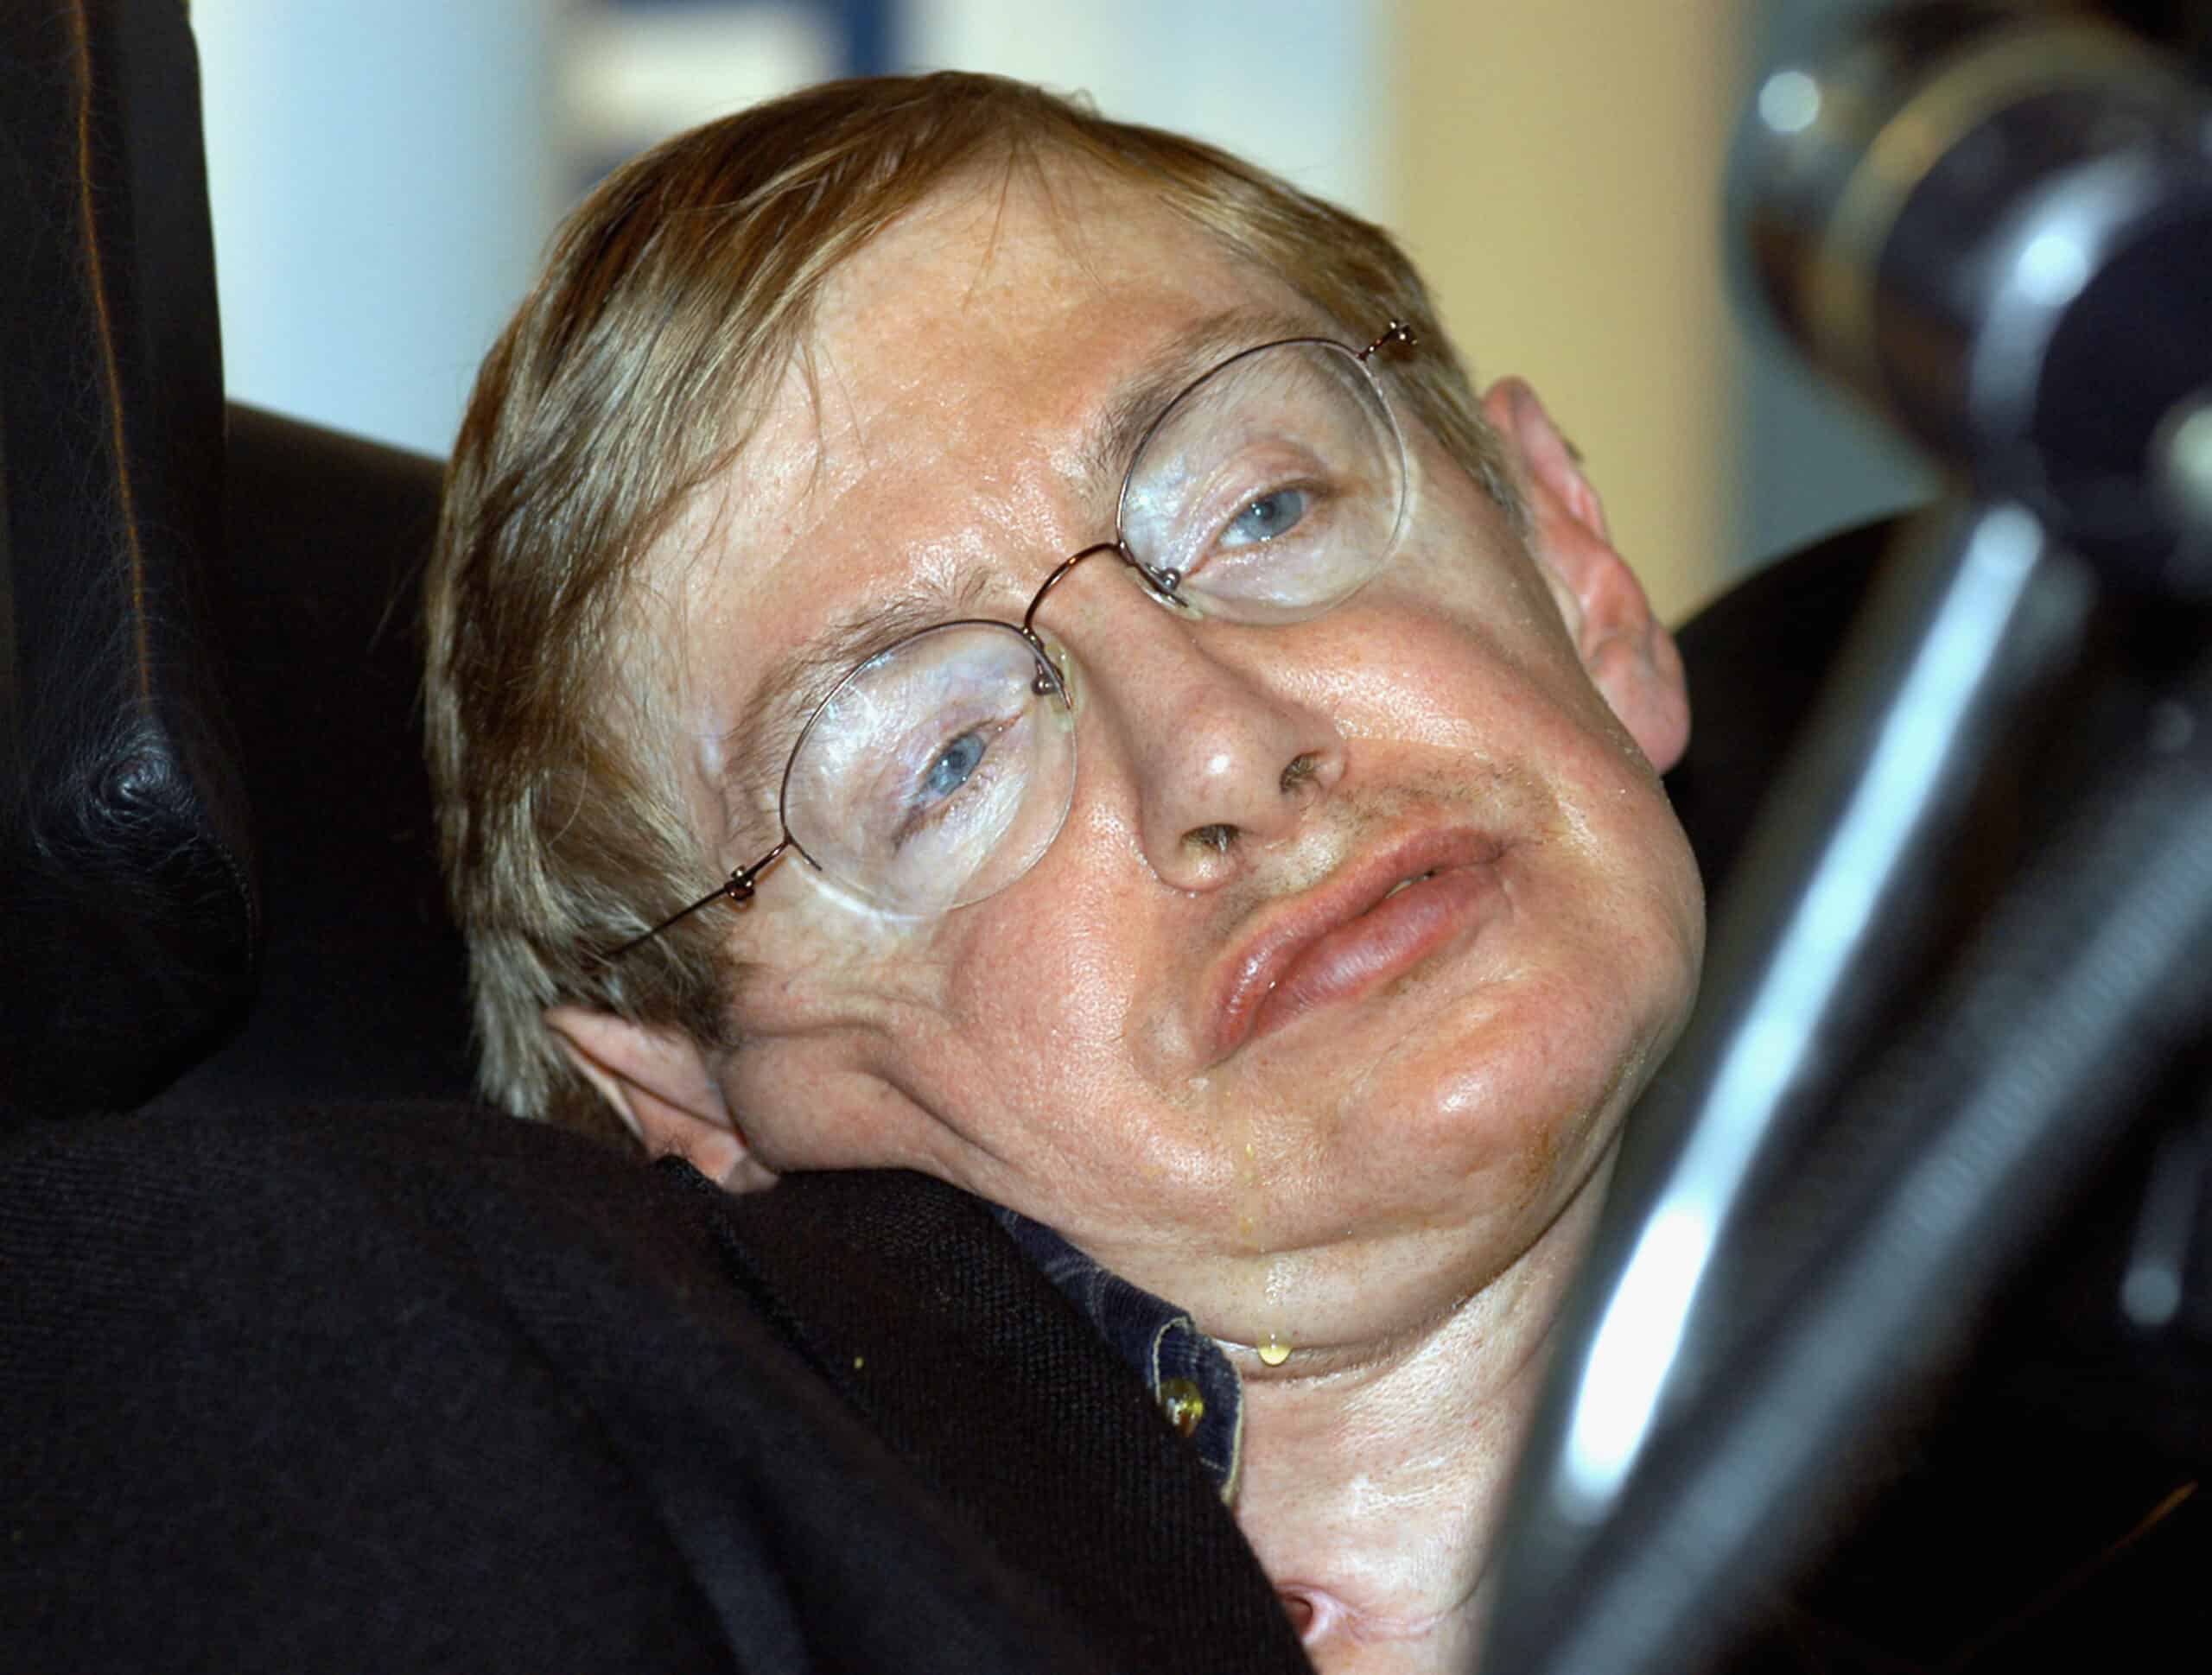 <p>Stephen Hawking was one of the most profound scientific minds to ever exist. Naturally, the author of many rich scientific books has a lot to say about the cosmos. Rather than bore you with the details, let's dive deep into some of the best quotes you'll hear on life, the universe, and everything else from such a great mind.</p>   <p><span>Would you please let us know what you think about our content? <p>Agree? Tell us by clicking the “Thumbs Up” button above.</p> Disagree? Leave a comment telling us what you’d change.</span></p>